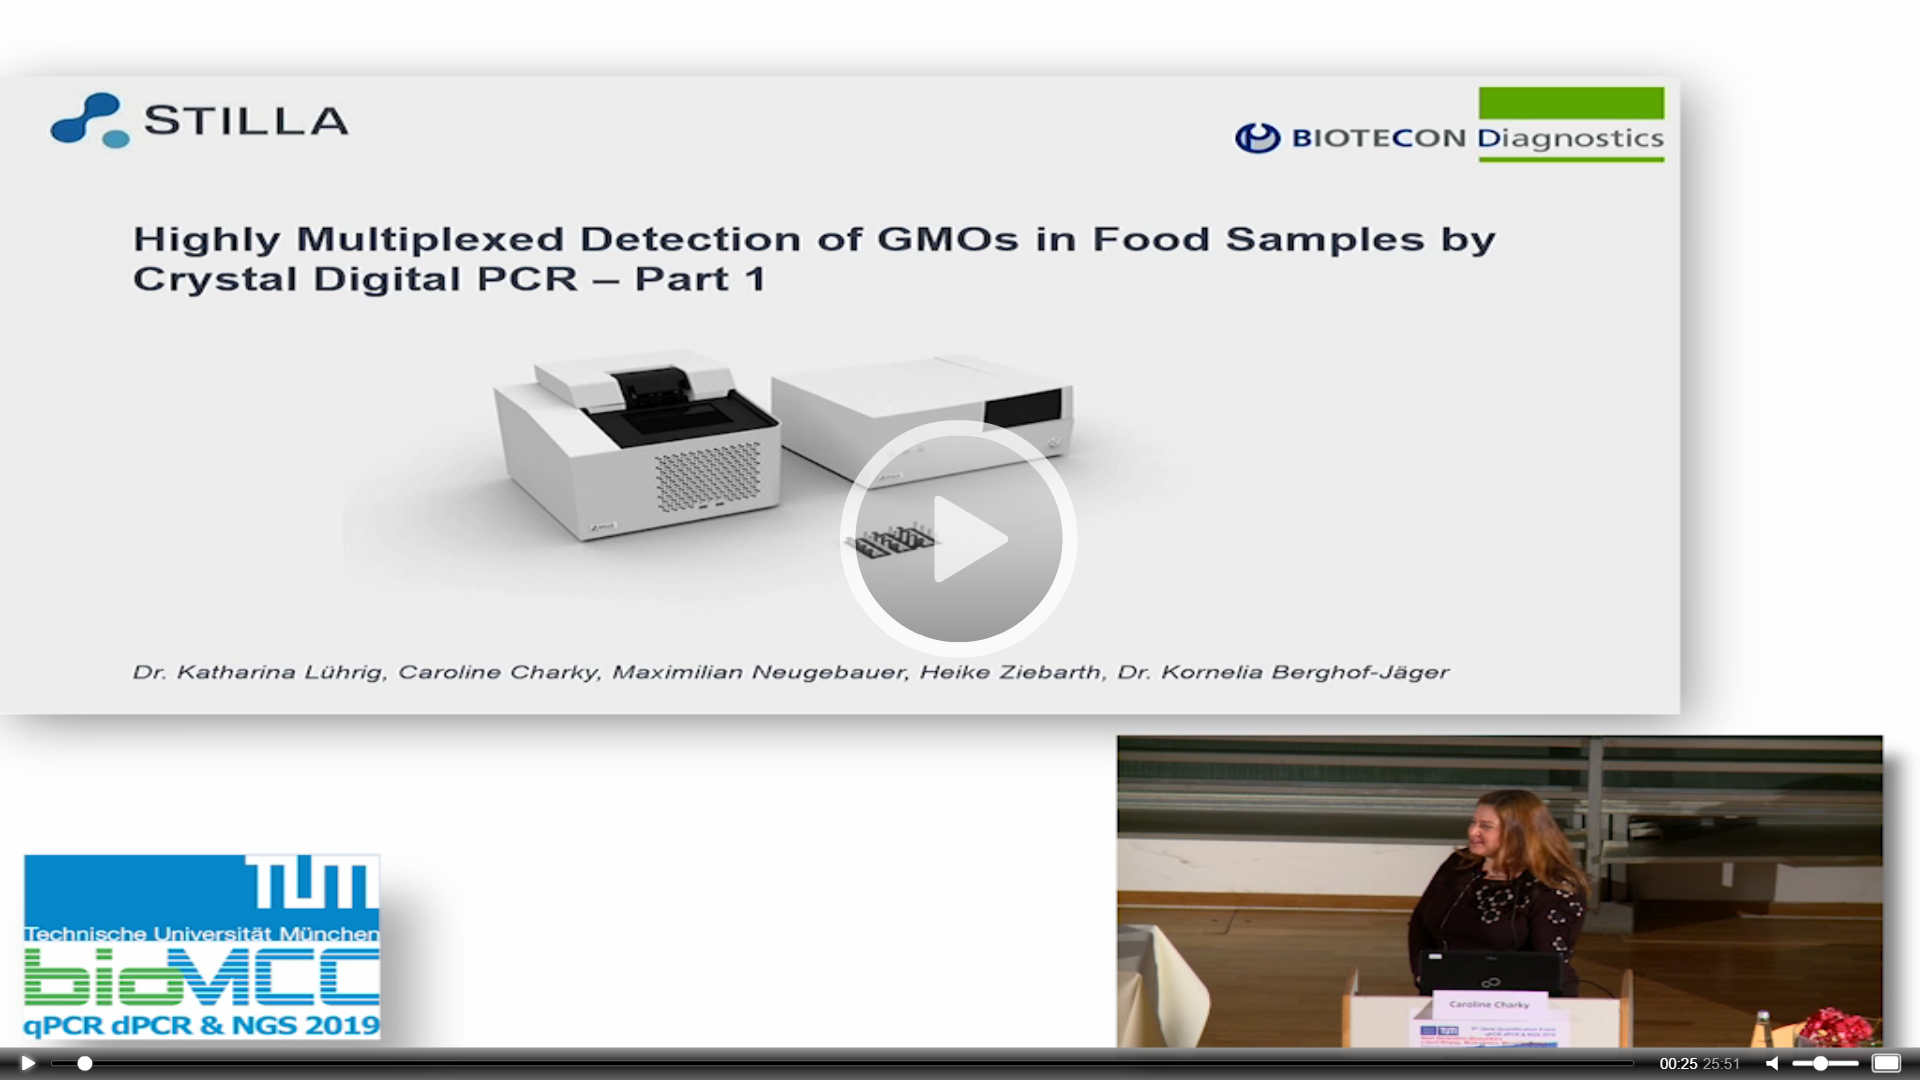 Highly Multiplexed Detection of GMOs in Food Samples by Crystal Digital PCR